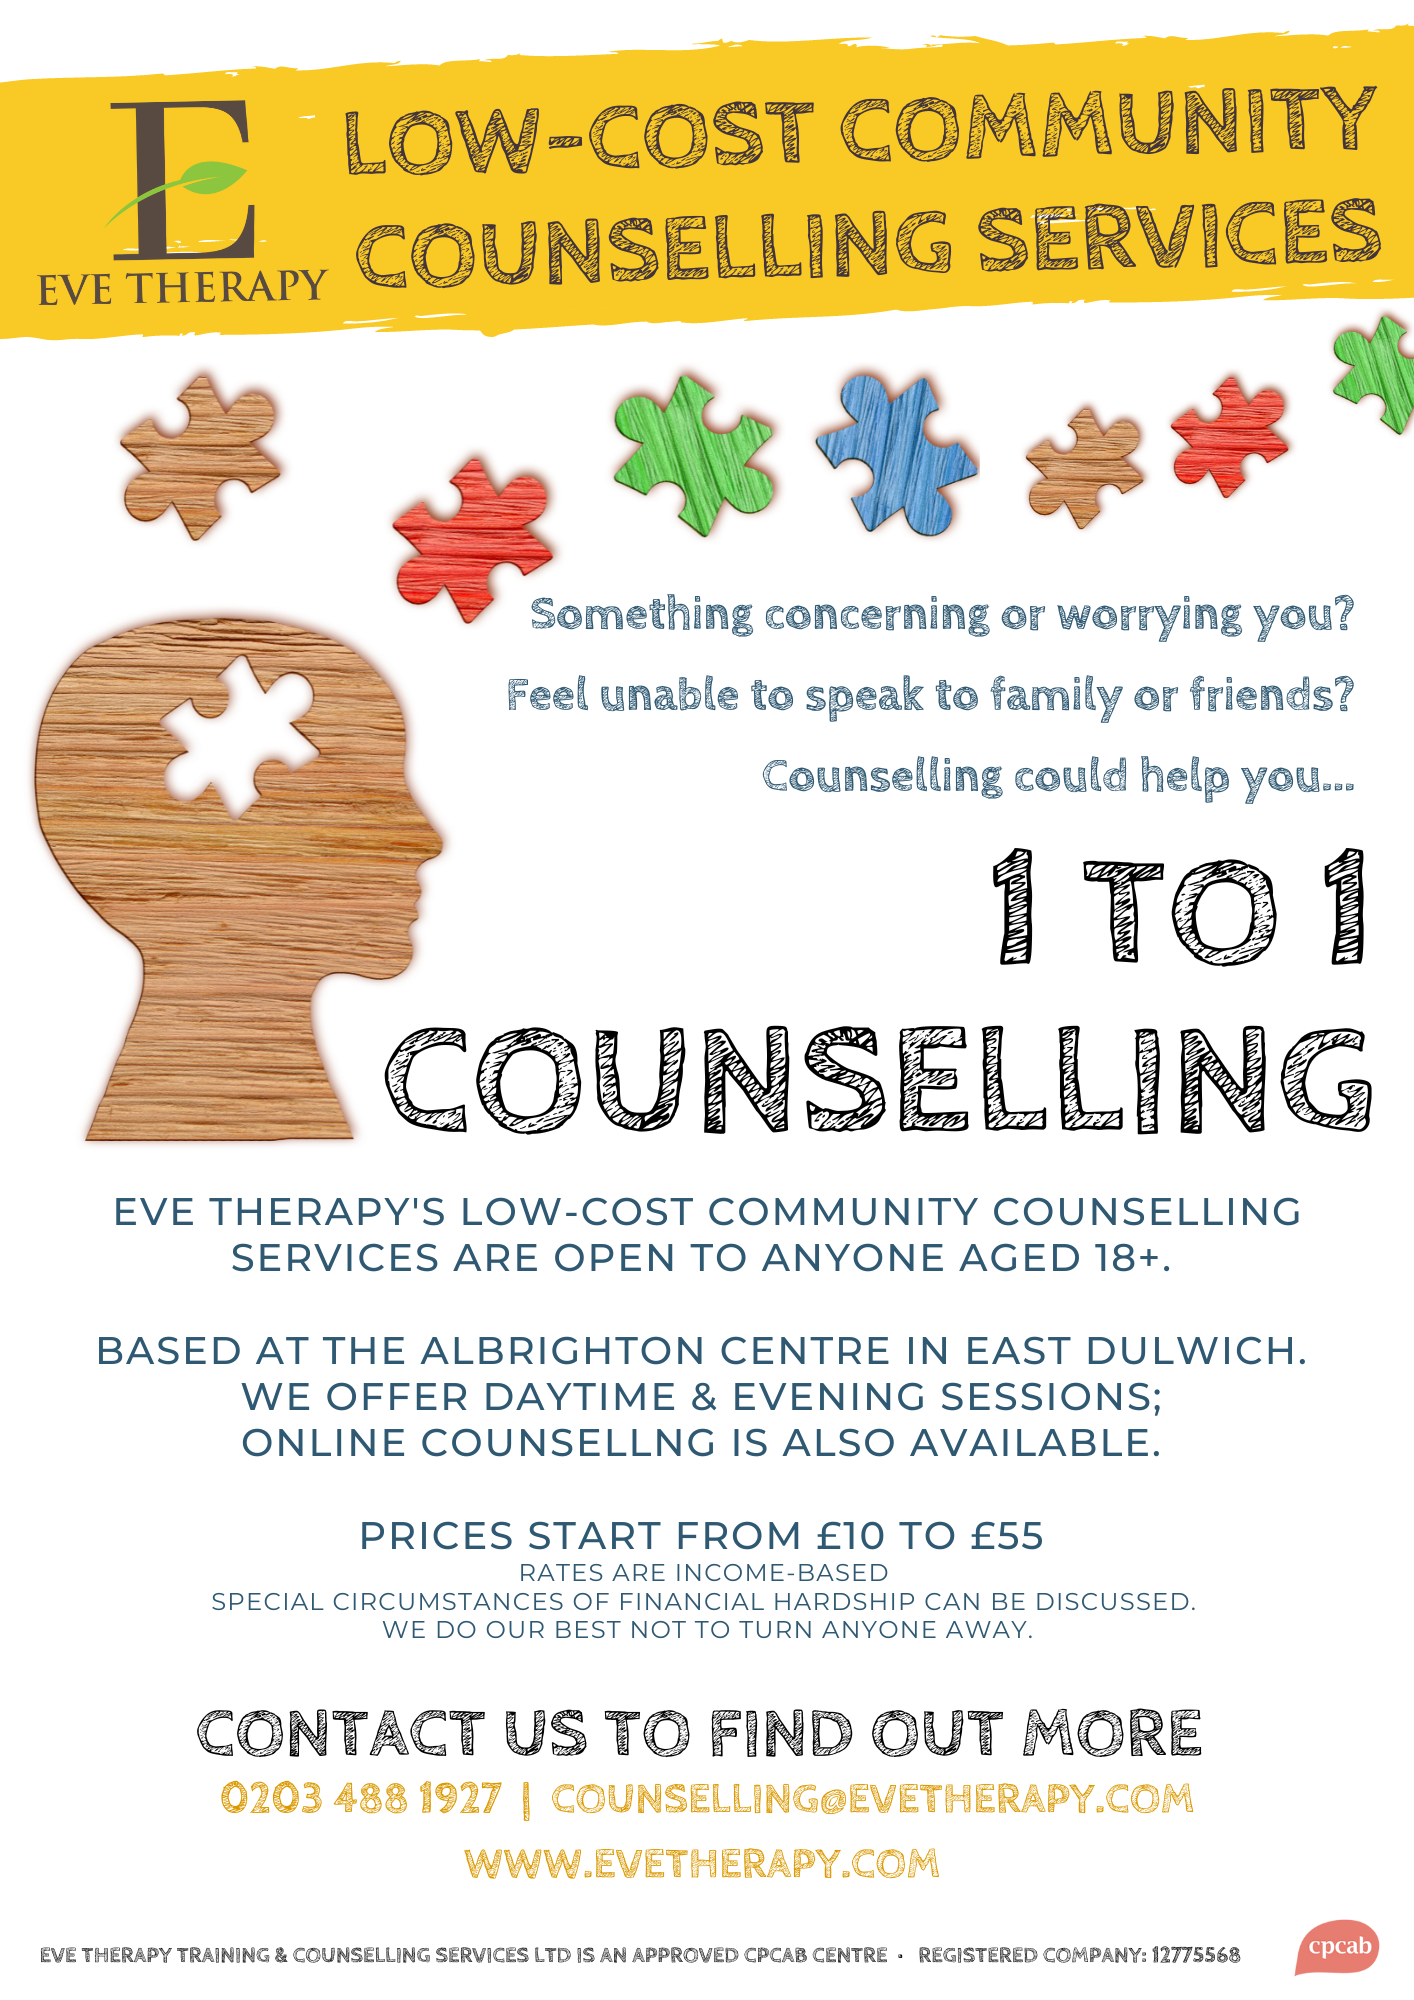 EVE Therapy Low-Cost Community Counselling - https://www.evetherapy.com/eve-counselling-agency.html